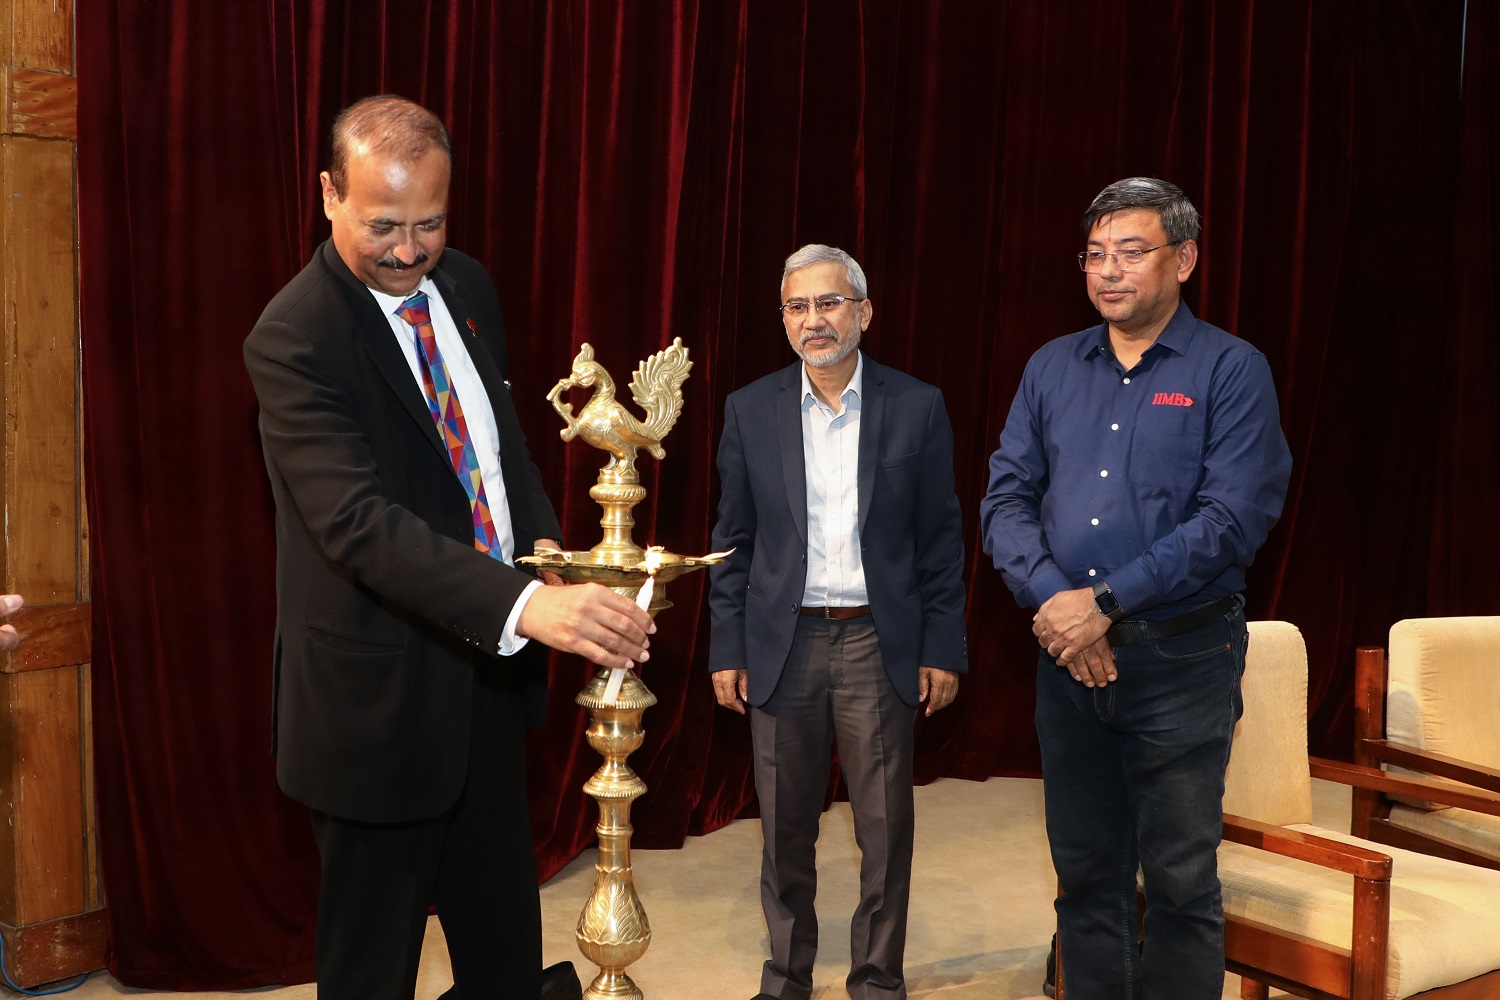 Tapan Singhel, MD, and CEO of Bajaj Allianz General Insurance, lit the ceremonial lamp to launch Vista 2023 on 7th July 2023. Prof. Rahul Dé, Dean, Programmes, Prof. R Srinivasan, Chairperson, PGP & PGPBA, were present at the inauguration.